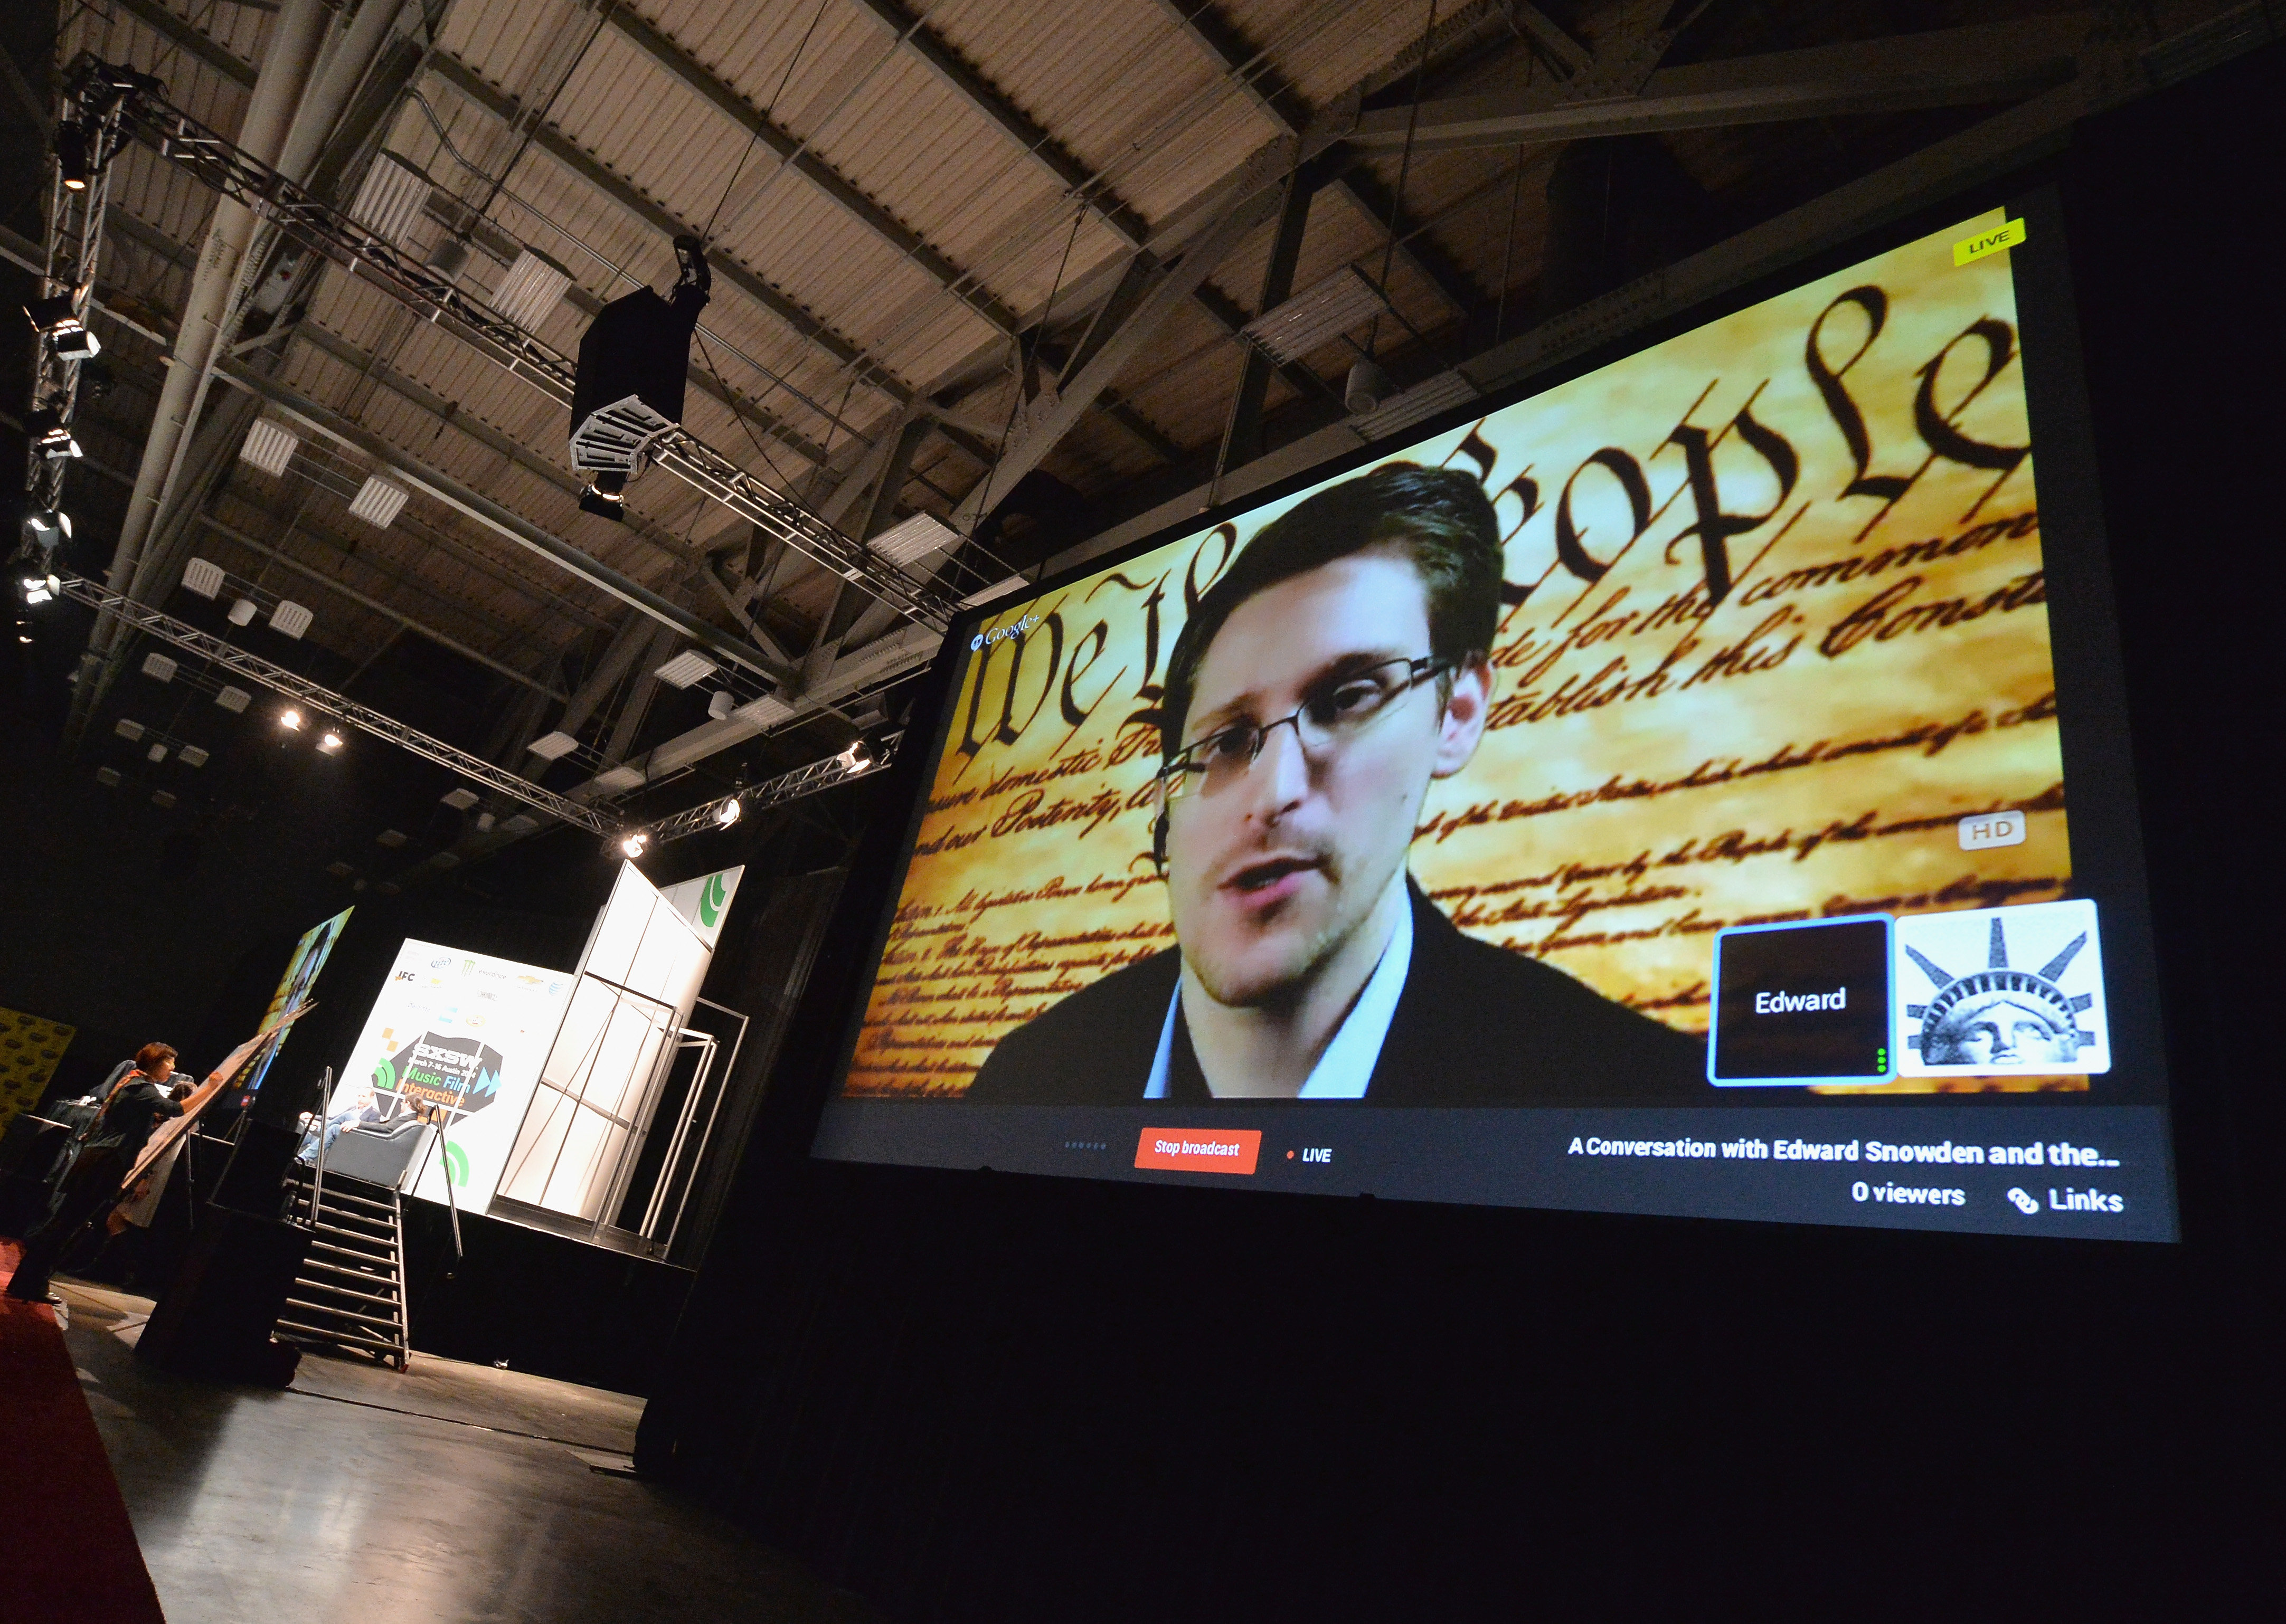 Edward Snowden speaks at the "Virtual Conversation With Edward Snowden" during the 2014 SXSW Music, Film + Interactive Festival at the Austin Convention Center on March 10, 2014 in Austin, Texas. (Michael Buckner&mdash;2014 Getty Images)